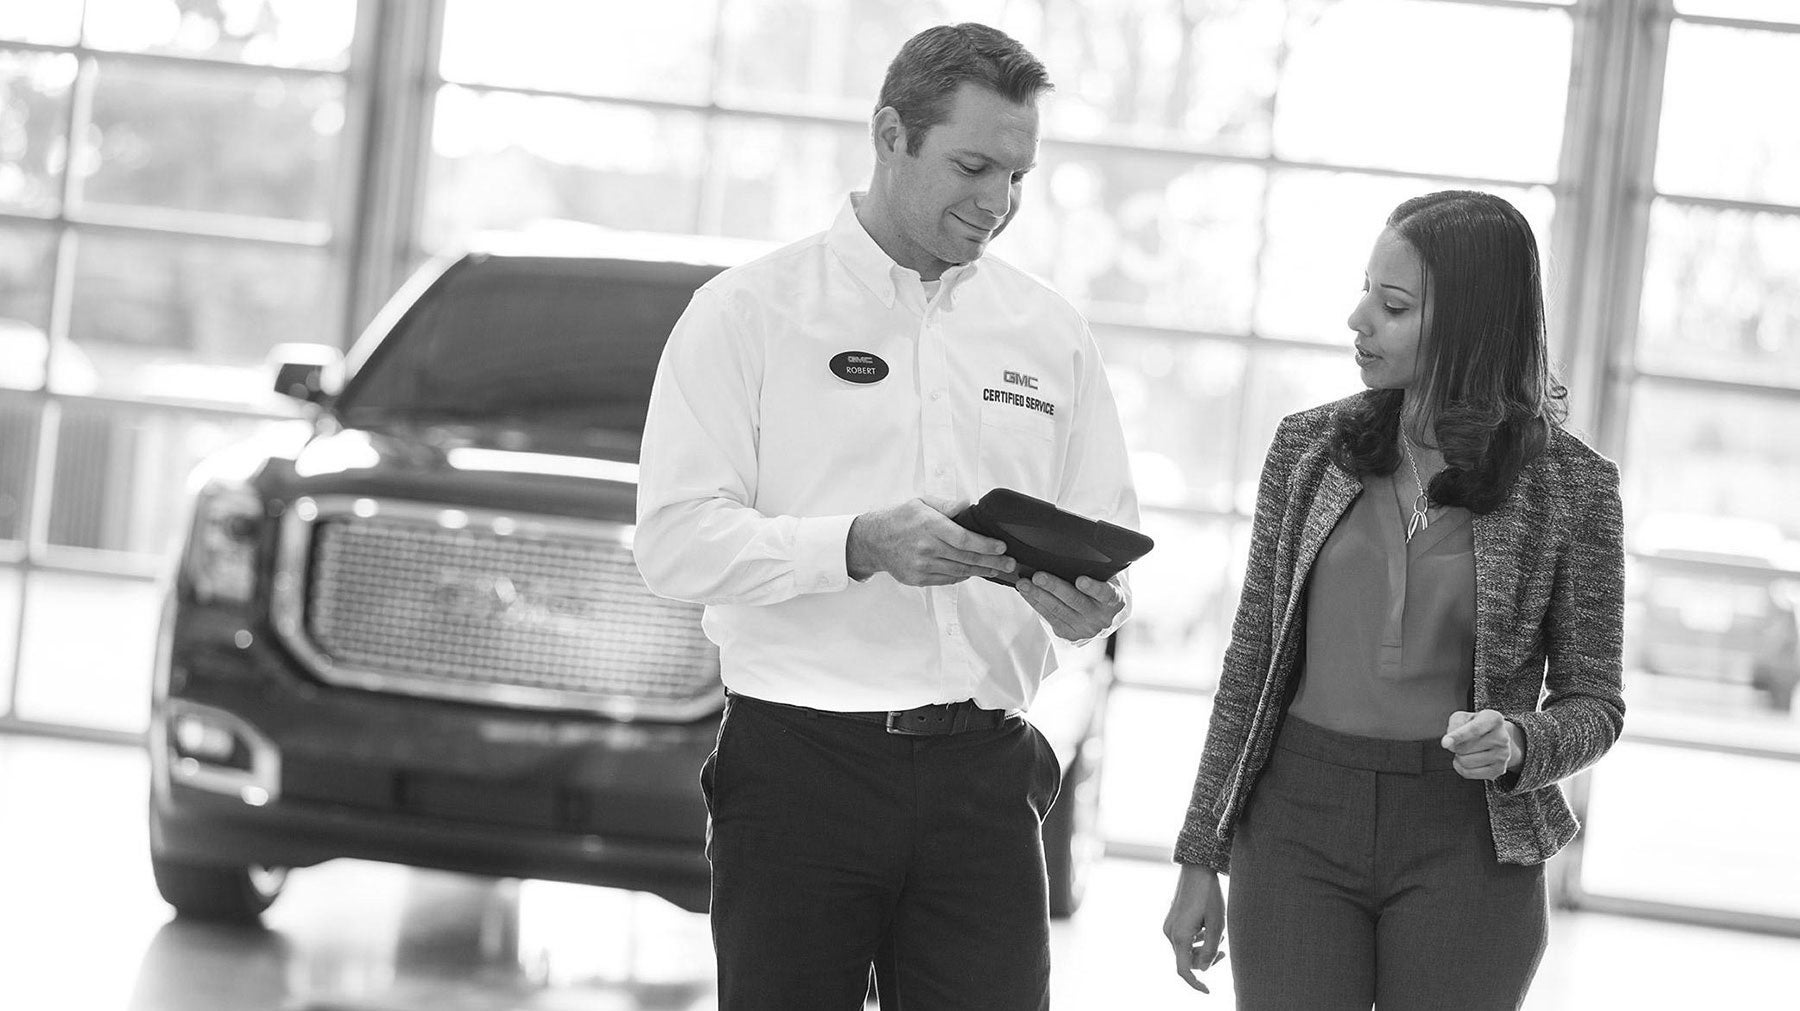 GMC employee discussing finance options with customer at the GMC dealership with a GMC model visible in the background